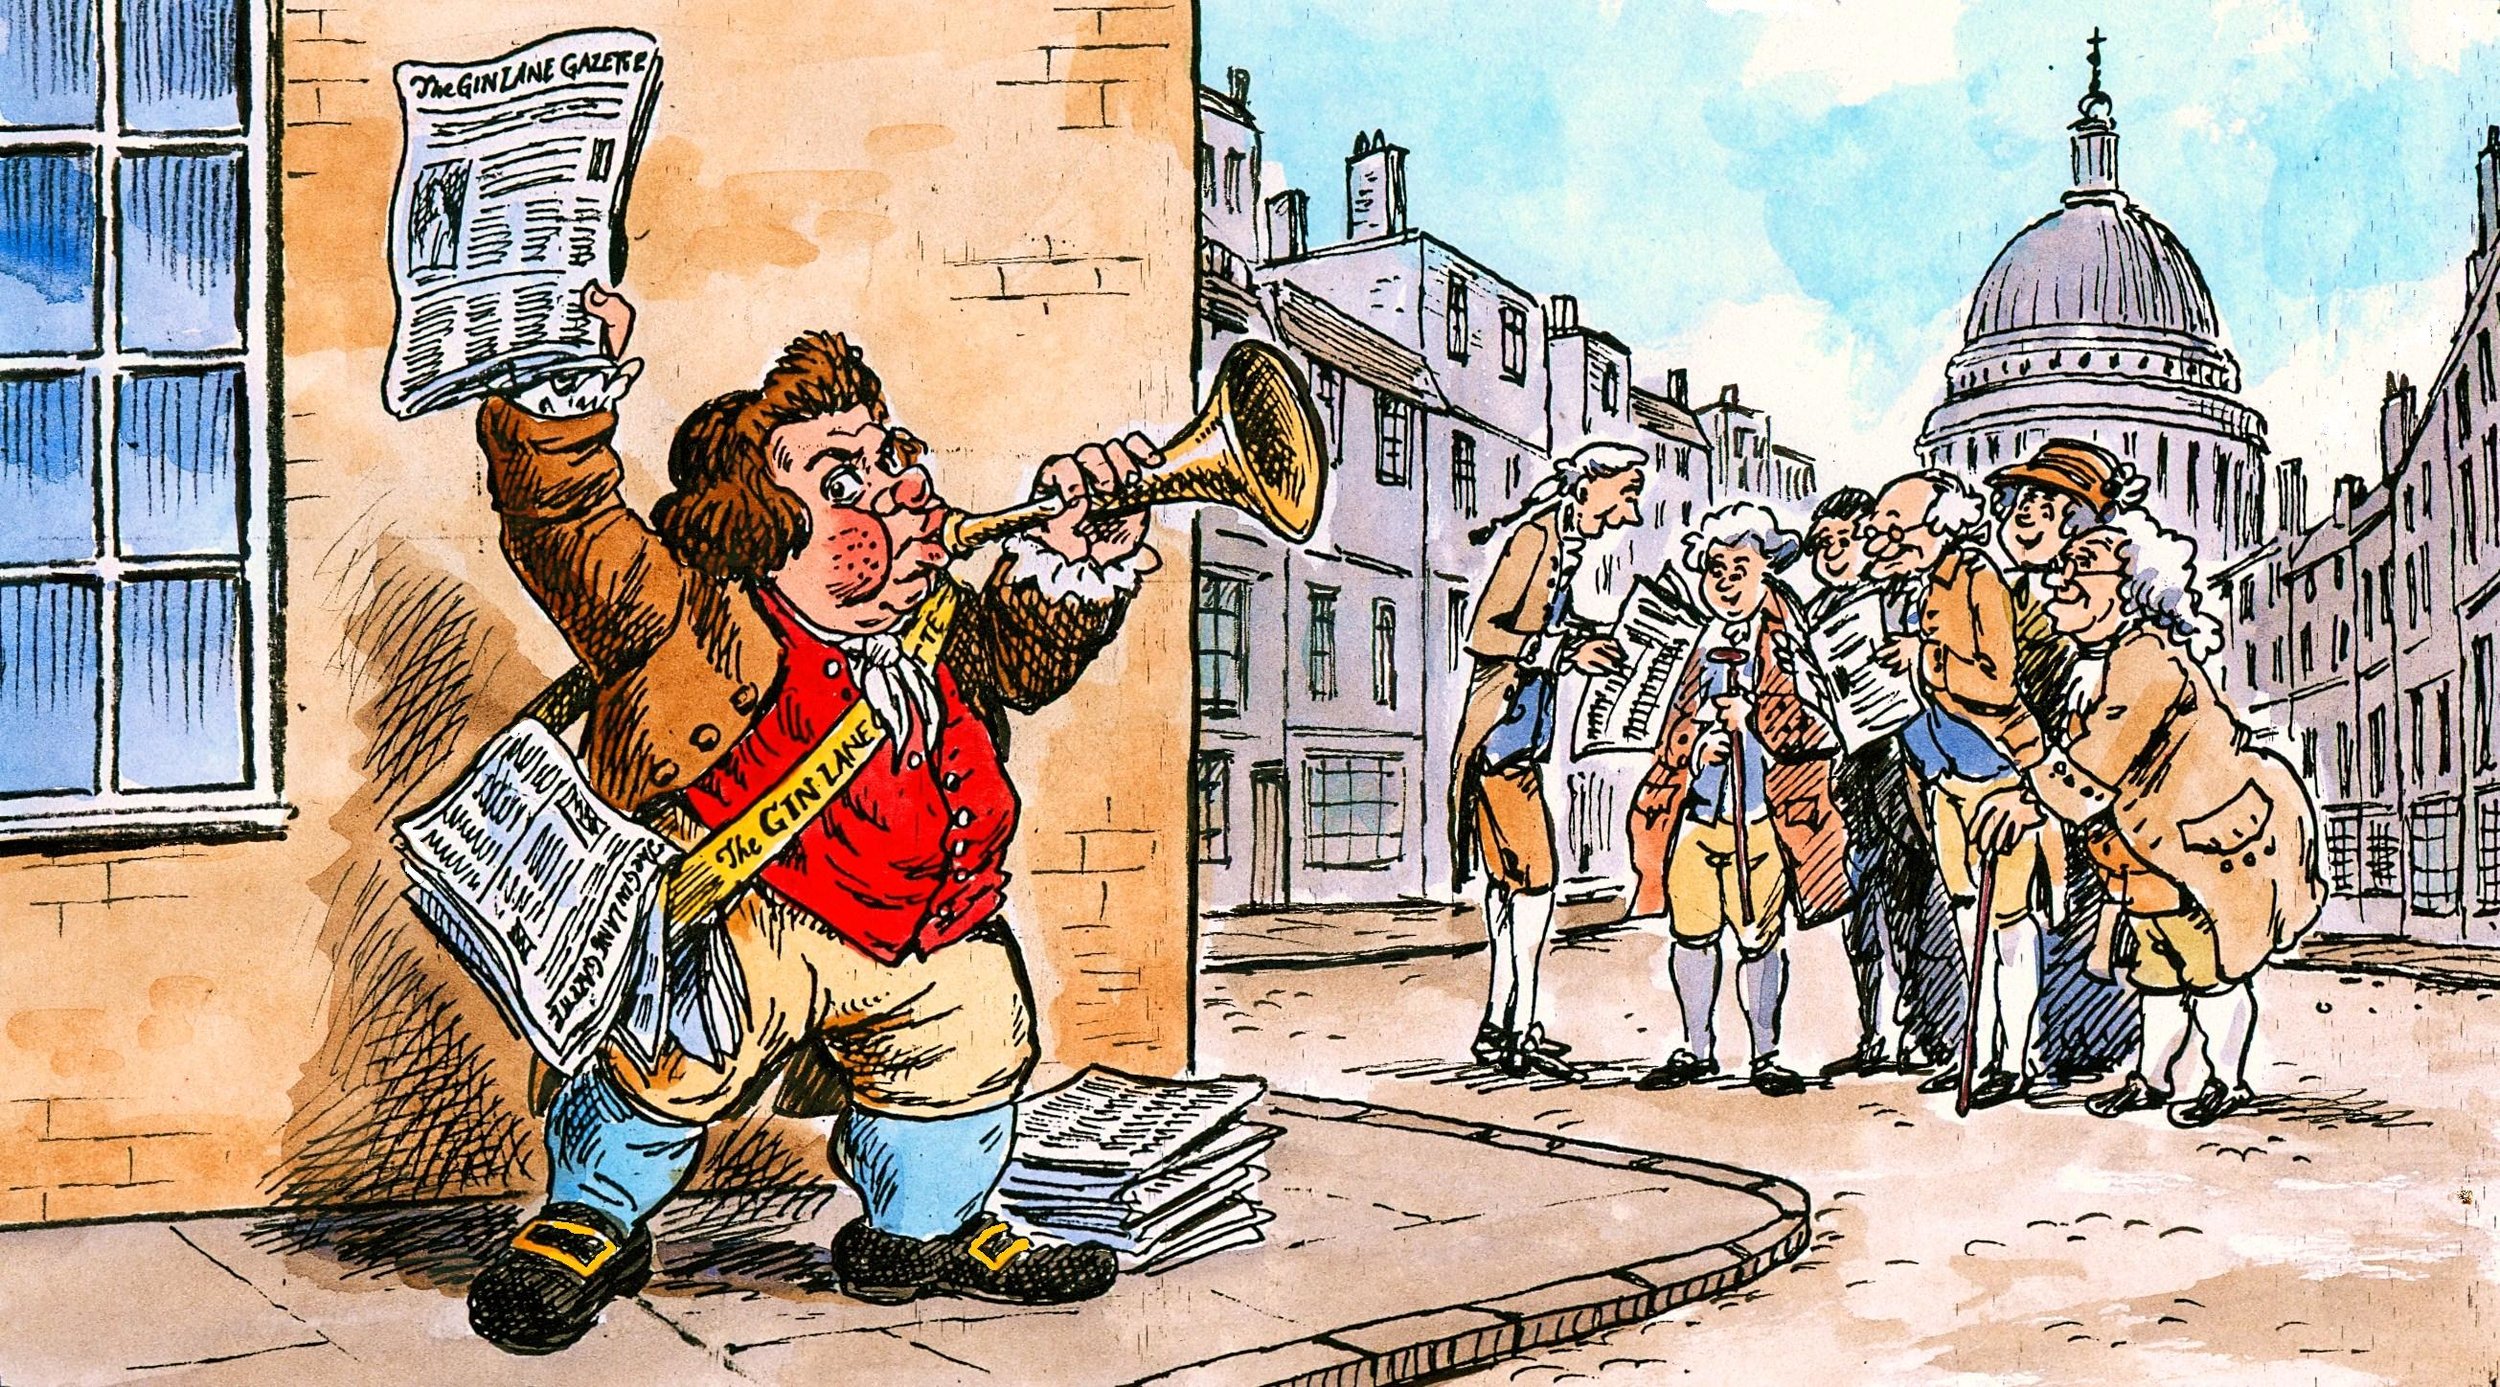 Miscellaneous 18th and 19th century cartoons